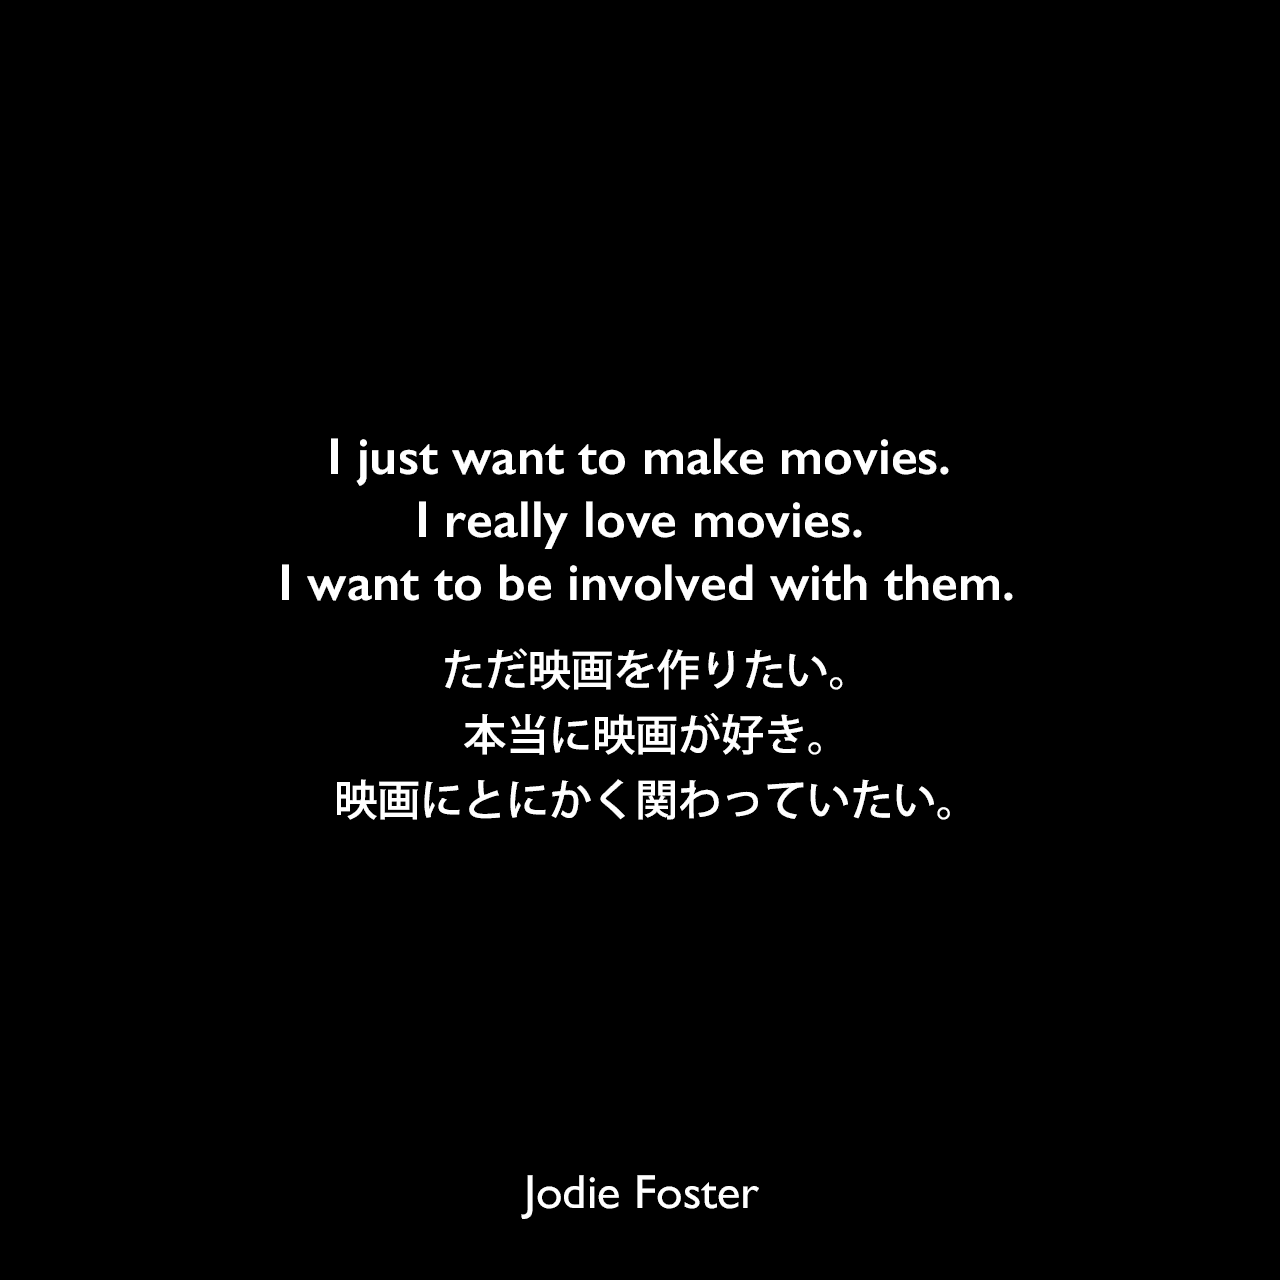 I just want to make movies. I really love movies. I want to be involved with them.ただ映画を作りたい。本当に映画が好き。映画にとにかく関わっていたい。Jodie Foster